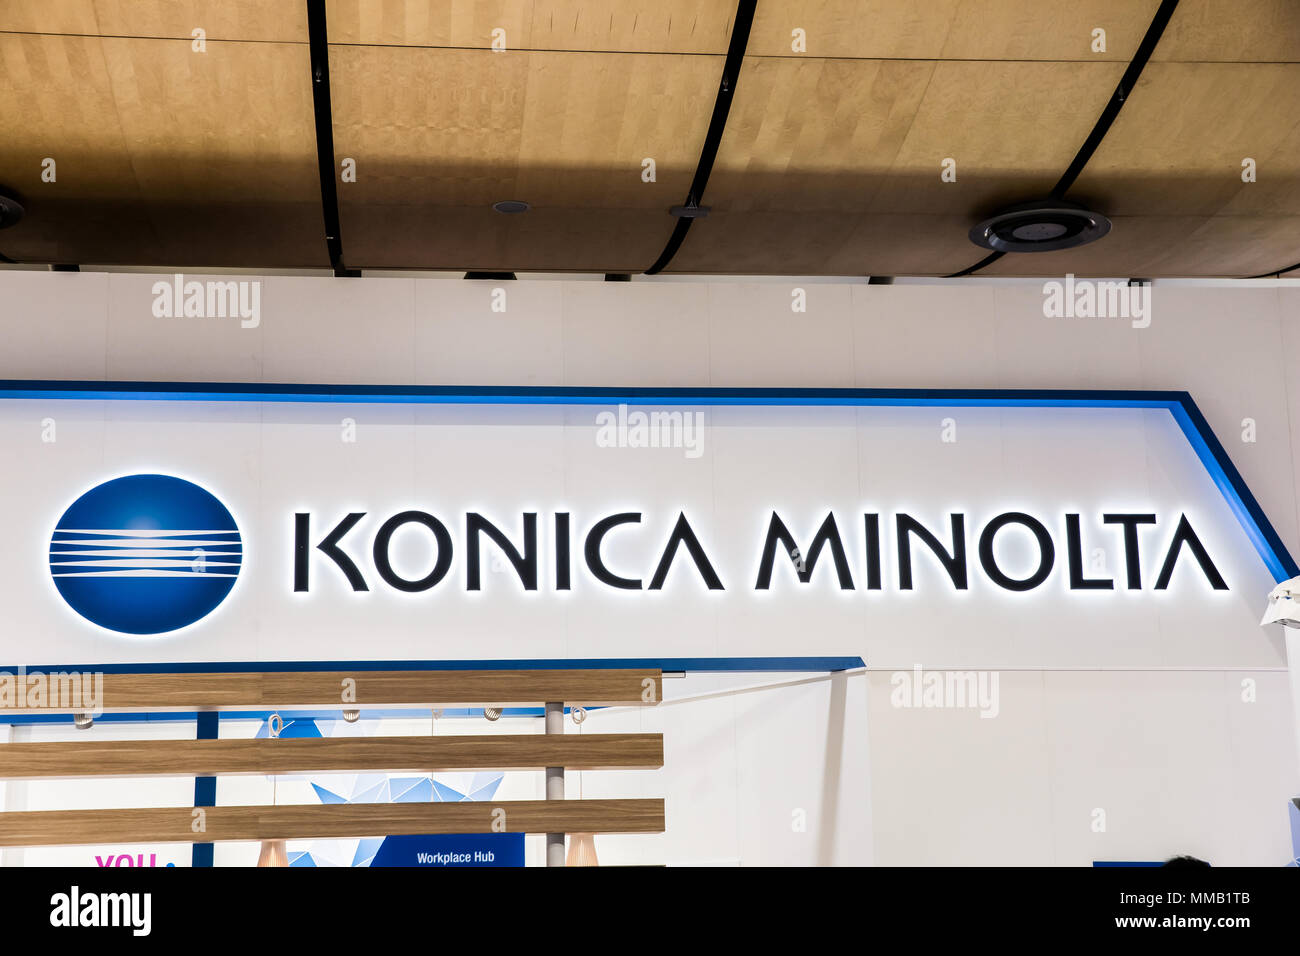 Hannover, Germany - April, 2018: Konica Minolta logo sign on booth stand on Messe fair in Hannover, Germany Stock Photo